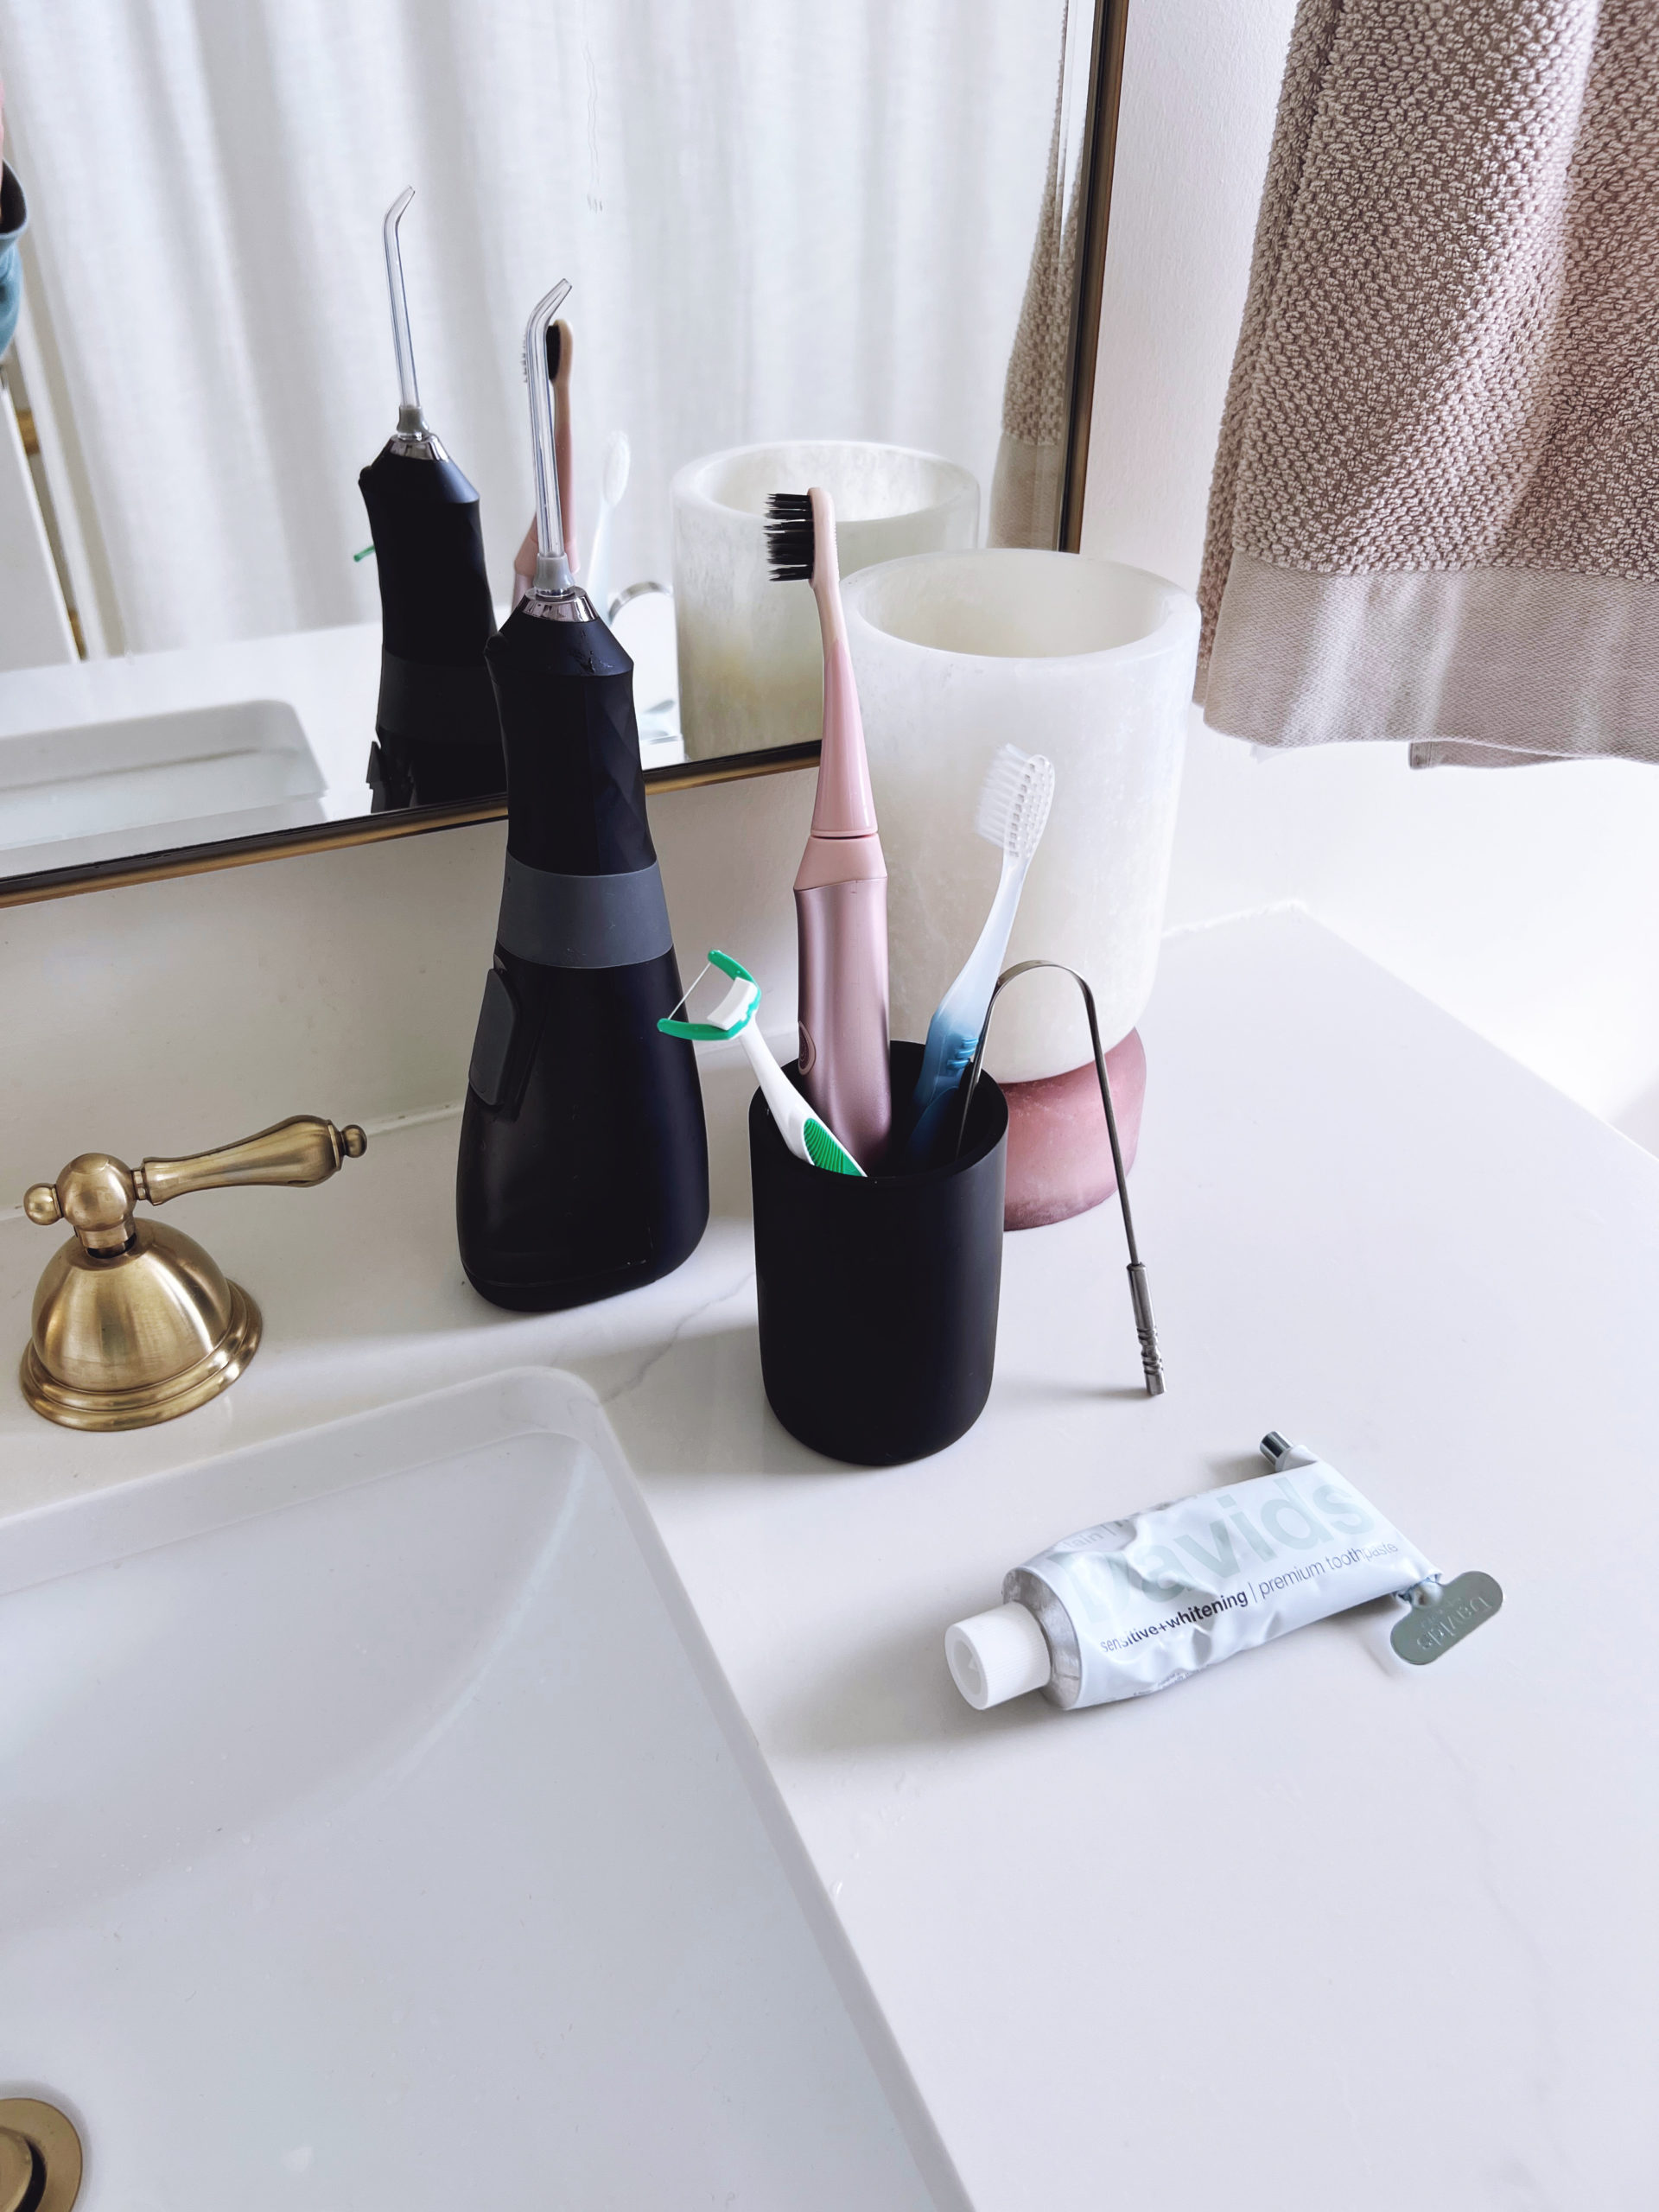 The Best 5 Clean Dental Products You Need In Your Oral Hygiene Routine